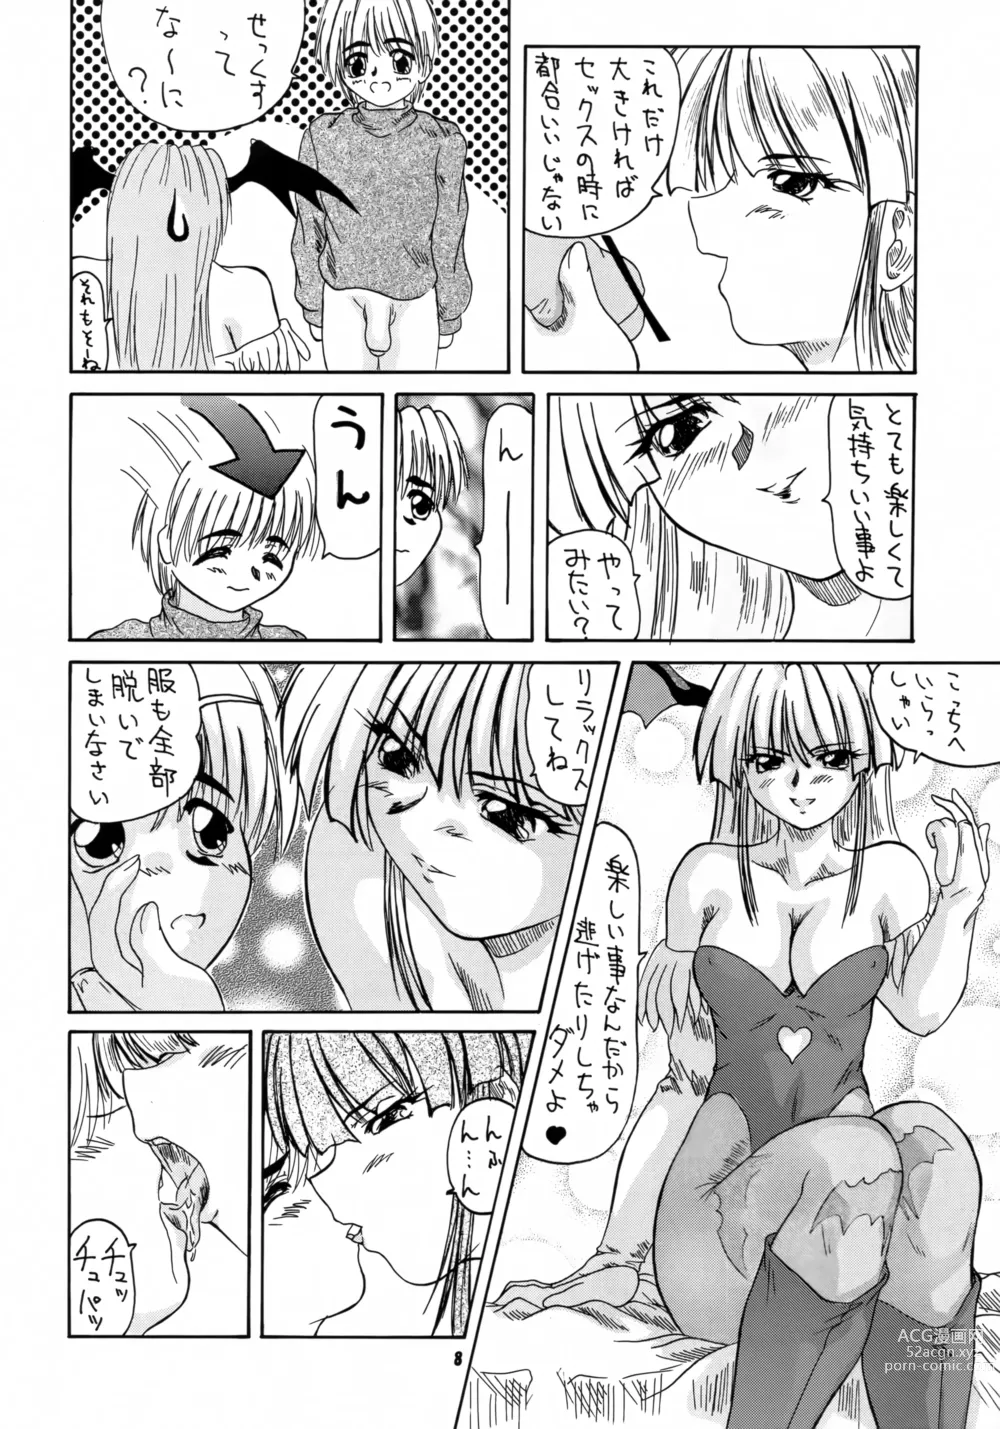 Page 7 of doujinshi 2STROKE TZR